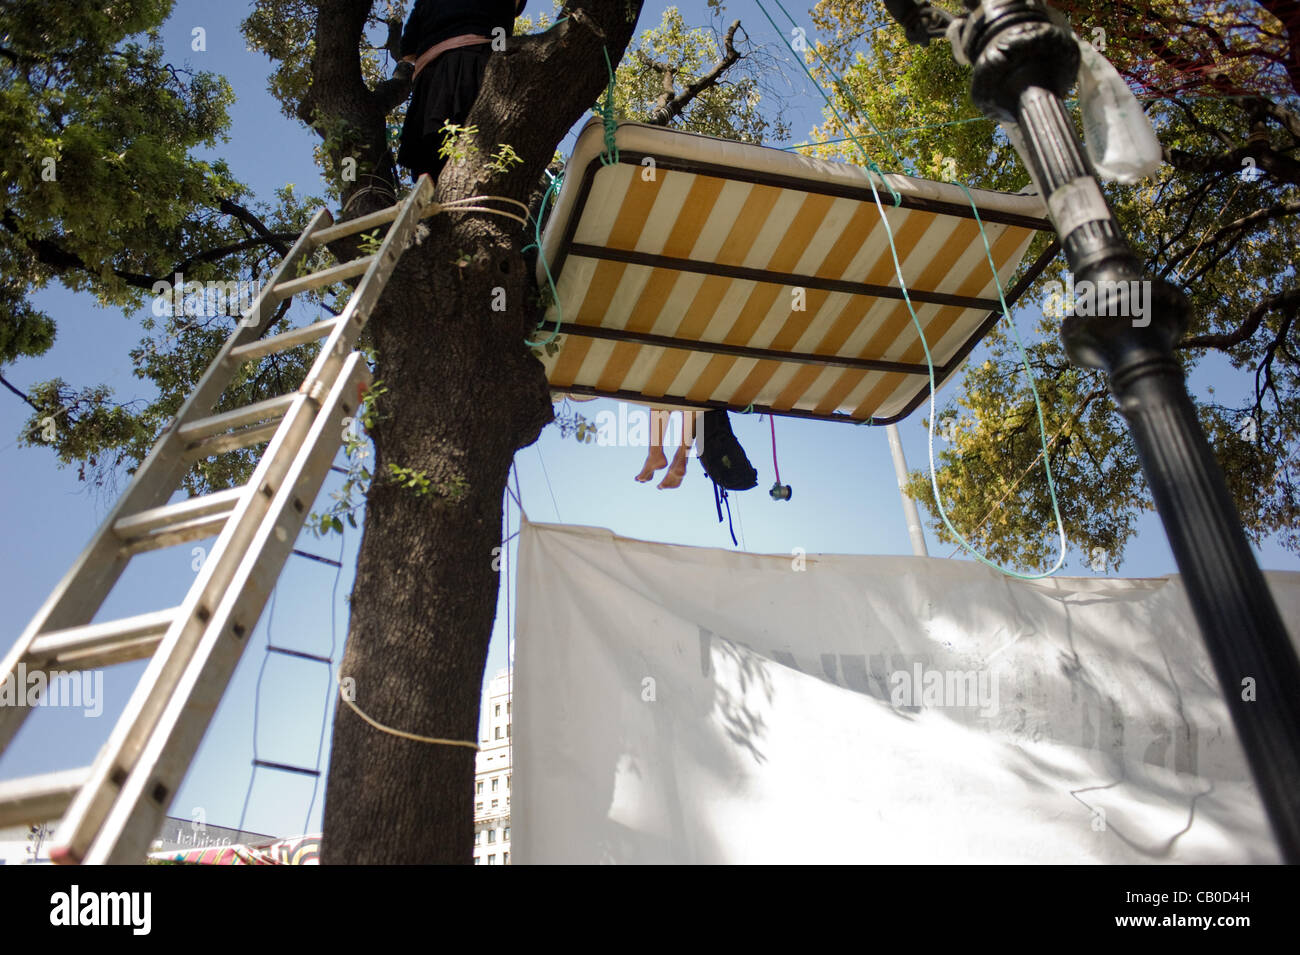 14 May, 2012-Barcelona, Spain.Feet are seen on a a bed hanging in a tree in the square.  After the demonstration of May 12, the movement of the Indignados (indignant) has returned at the Catalunya Square (center of Barcelona), birthplace of the movement  a year ago. Stock Photo